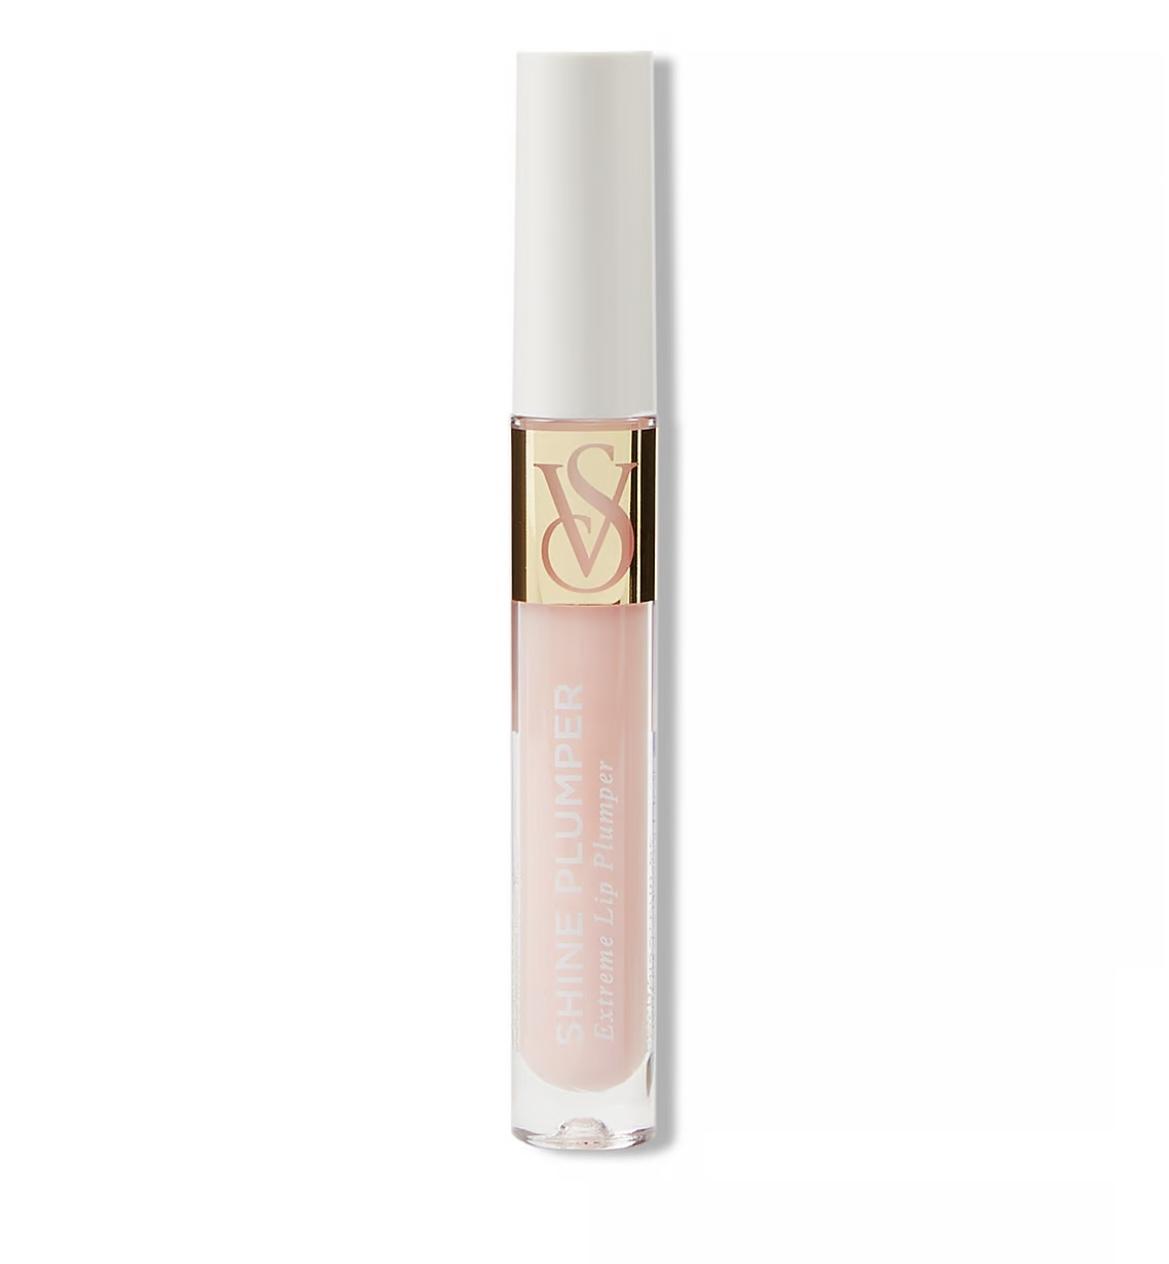 Victoria's Secret Shine Plumper Extreme Lip Plumper in Crystal Clear,  Plumping Lip Gloss for Women with Marine Collagen Microspheres, Lip  Treatment